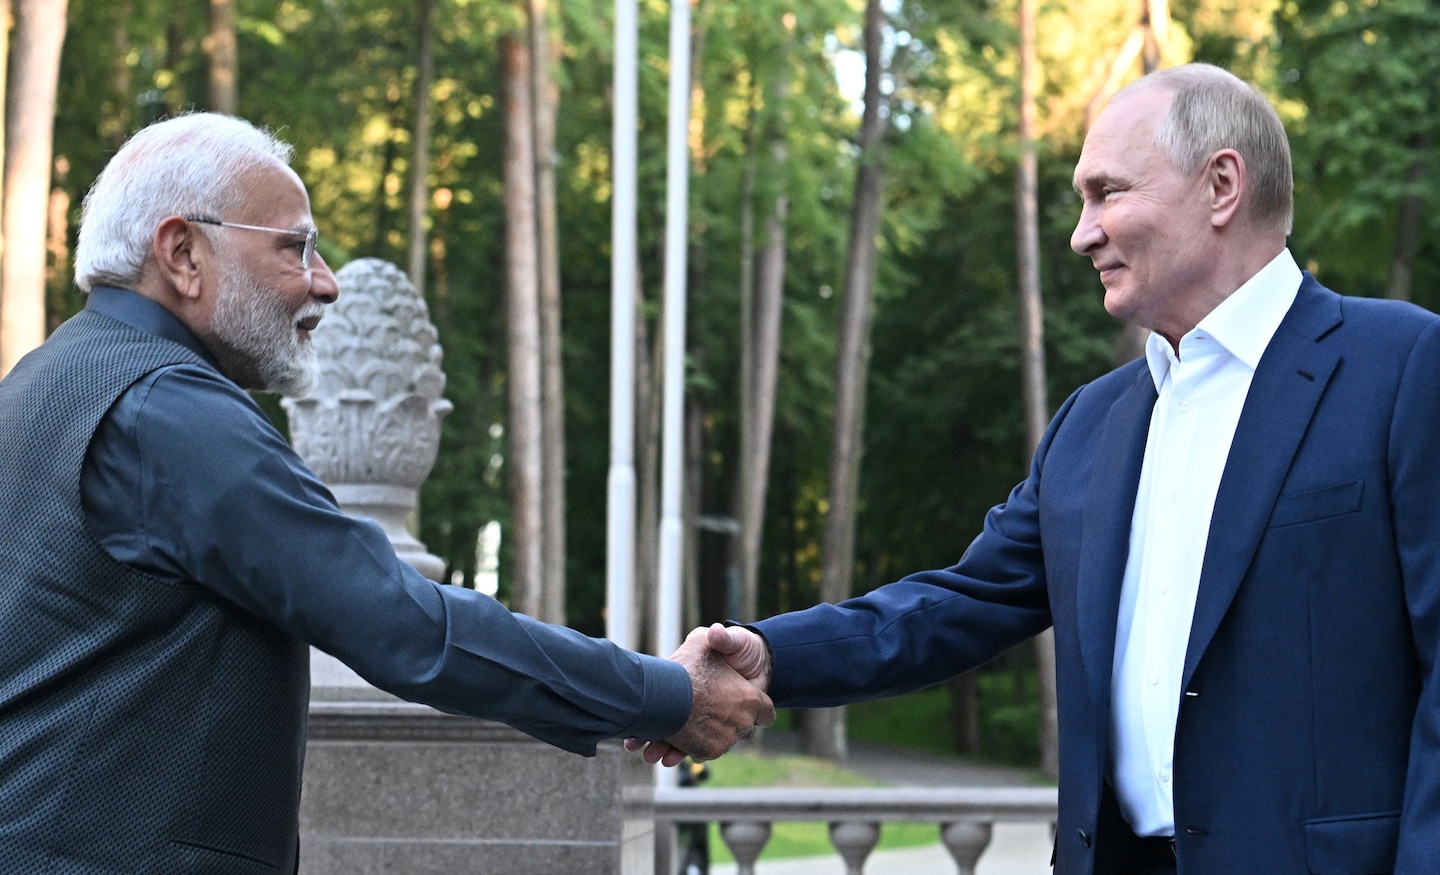 Putin receives Modi in Moscow with high stakes for Russia and India